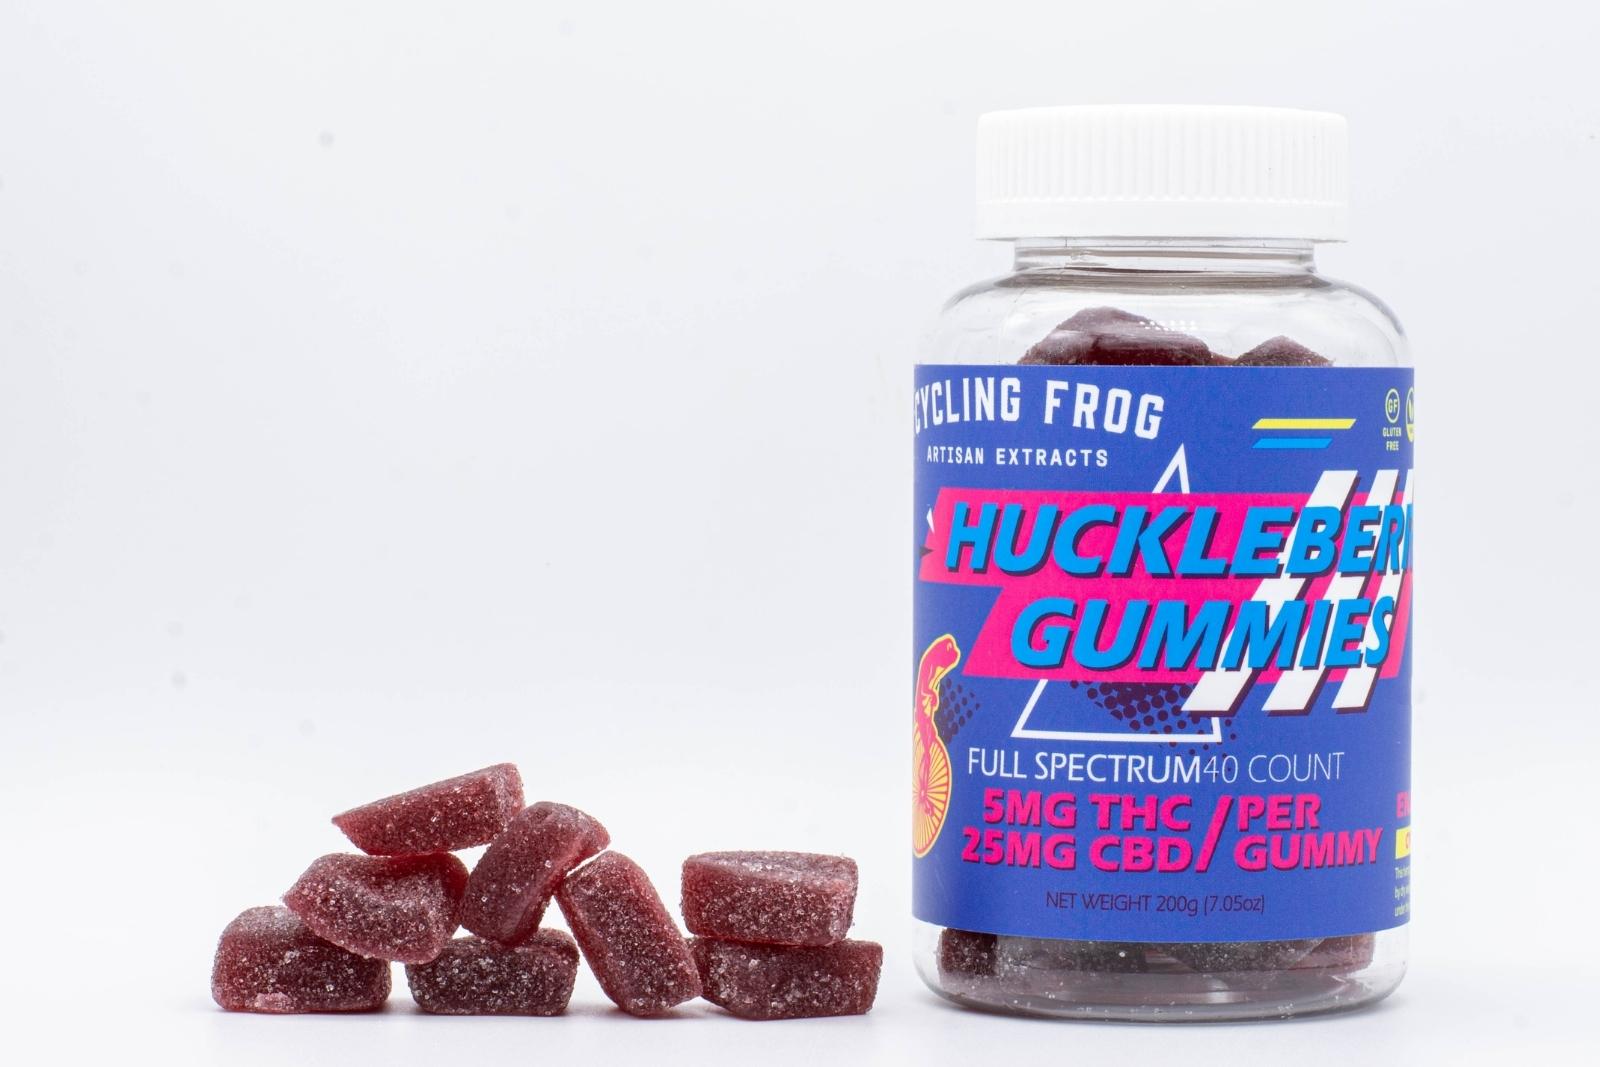 One 40-count Huckleberry CBD gummies by Cycling Frog, next to a pile of the gummies, on a white background